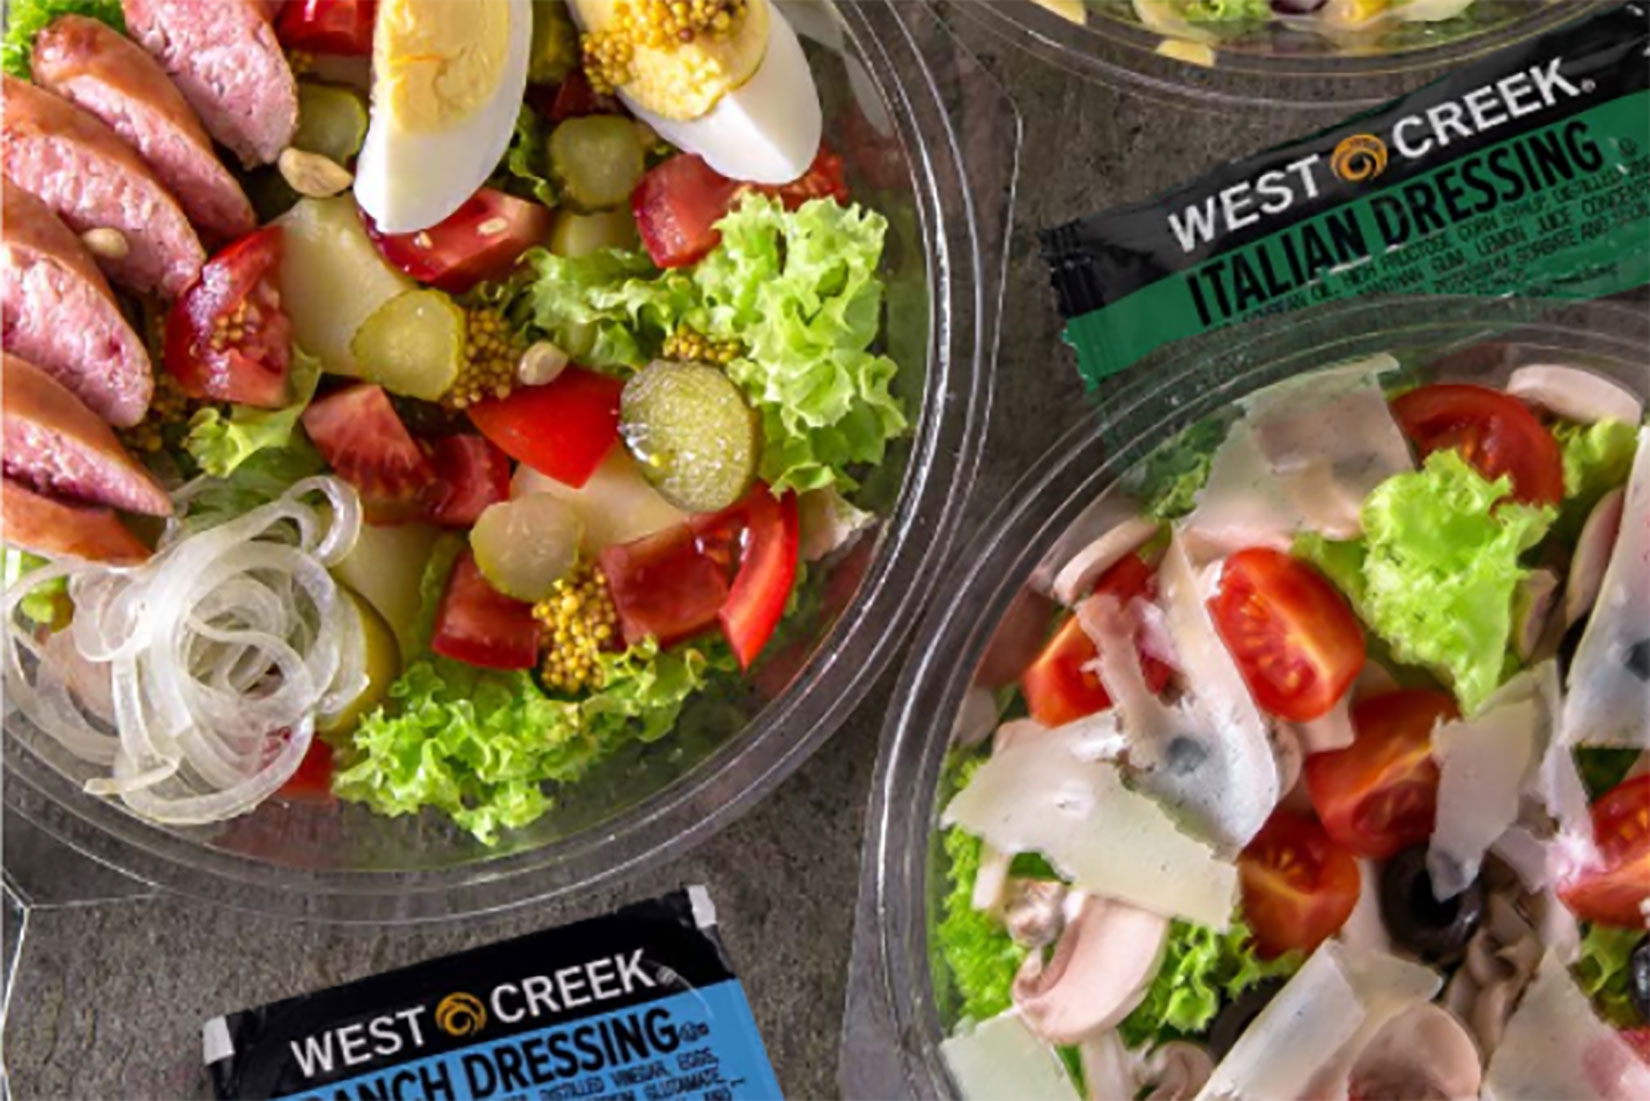 Salads with West Creek Portion Control Packets